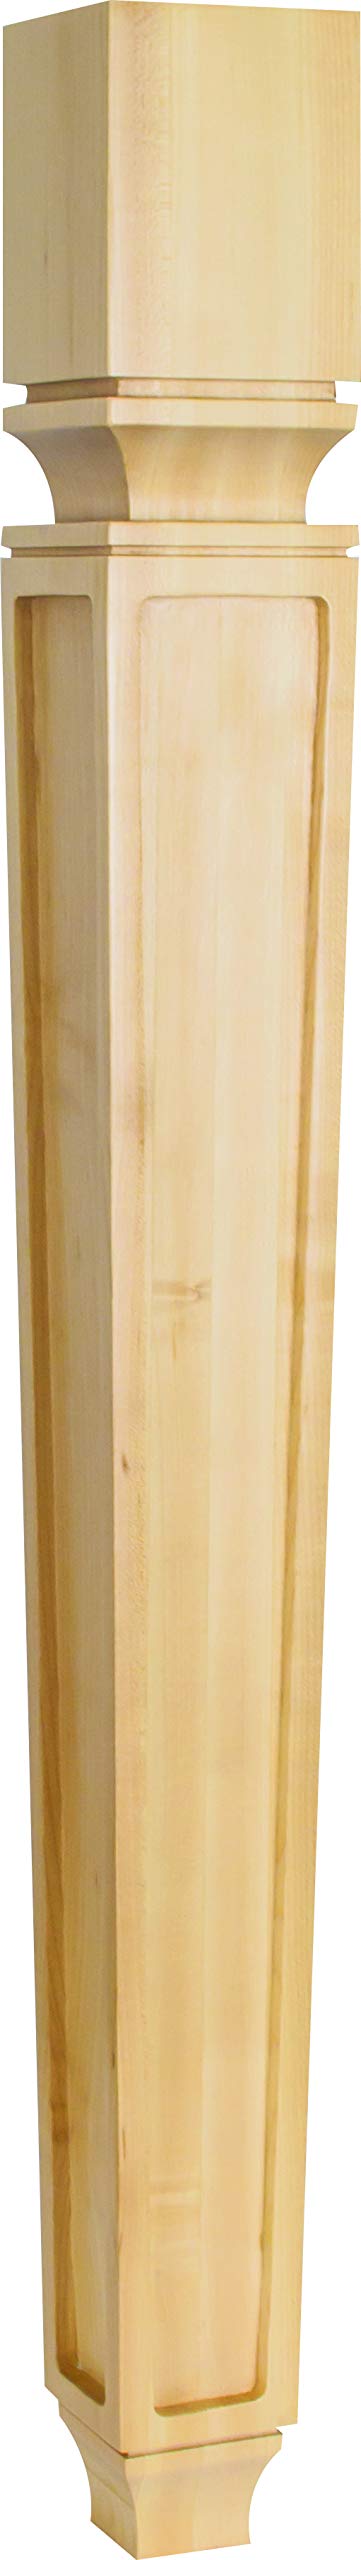 Hardware Resources P83-5-WB 5" W x 5" D x 35-1/2" H White Birch Cathedral Turned Post